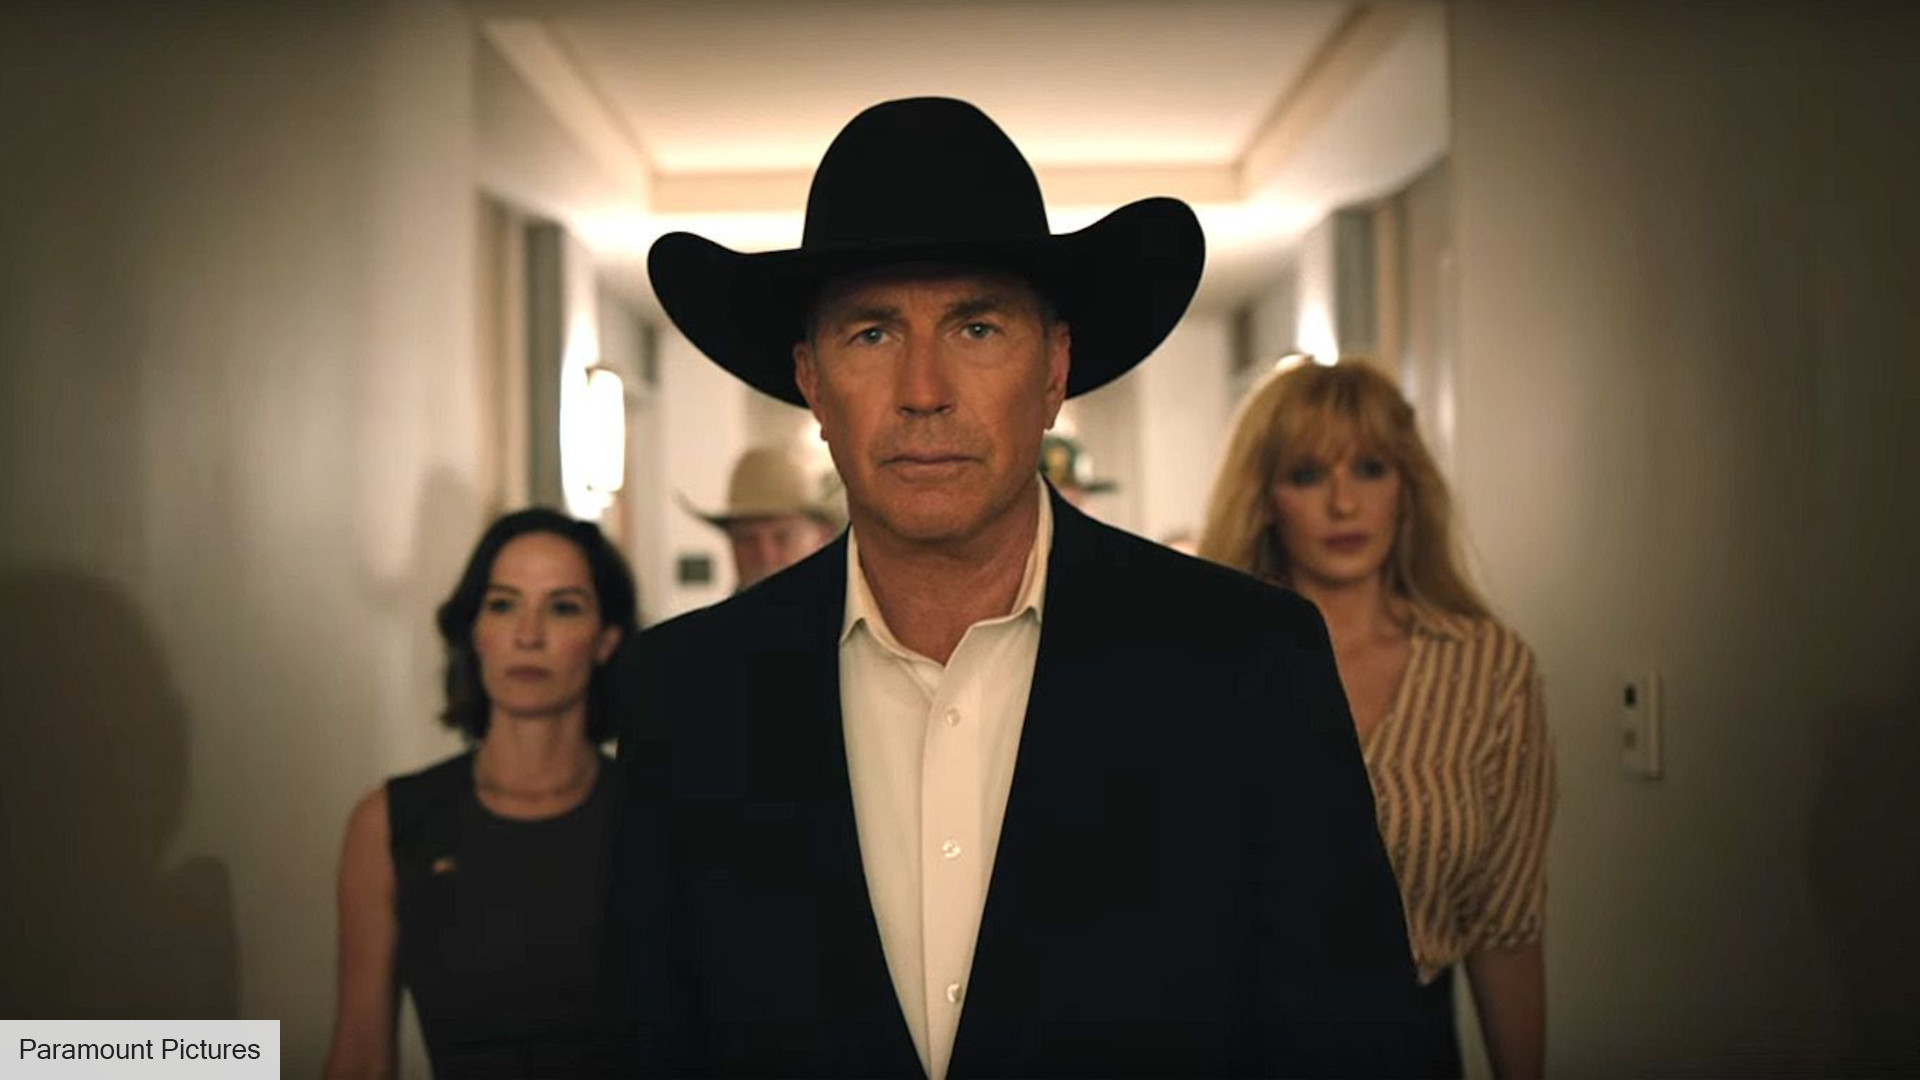 Yellowstone season 5 release date, trailer, cast, and more The